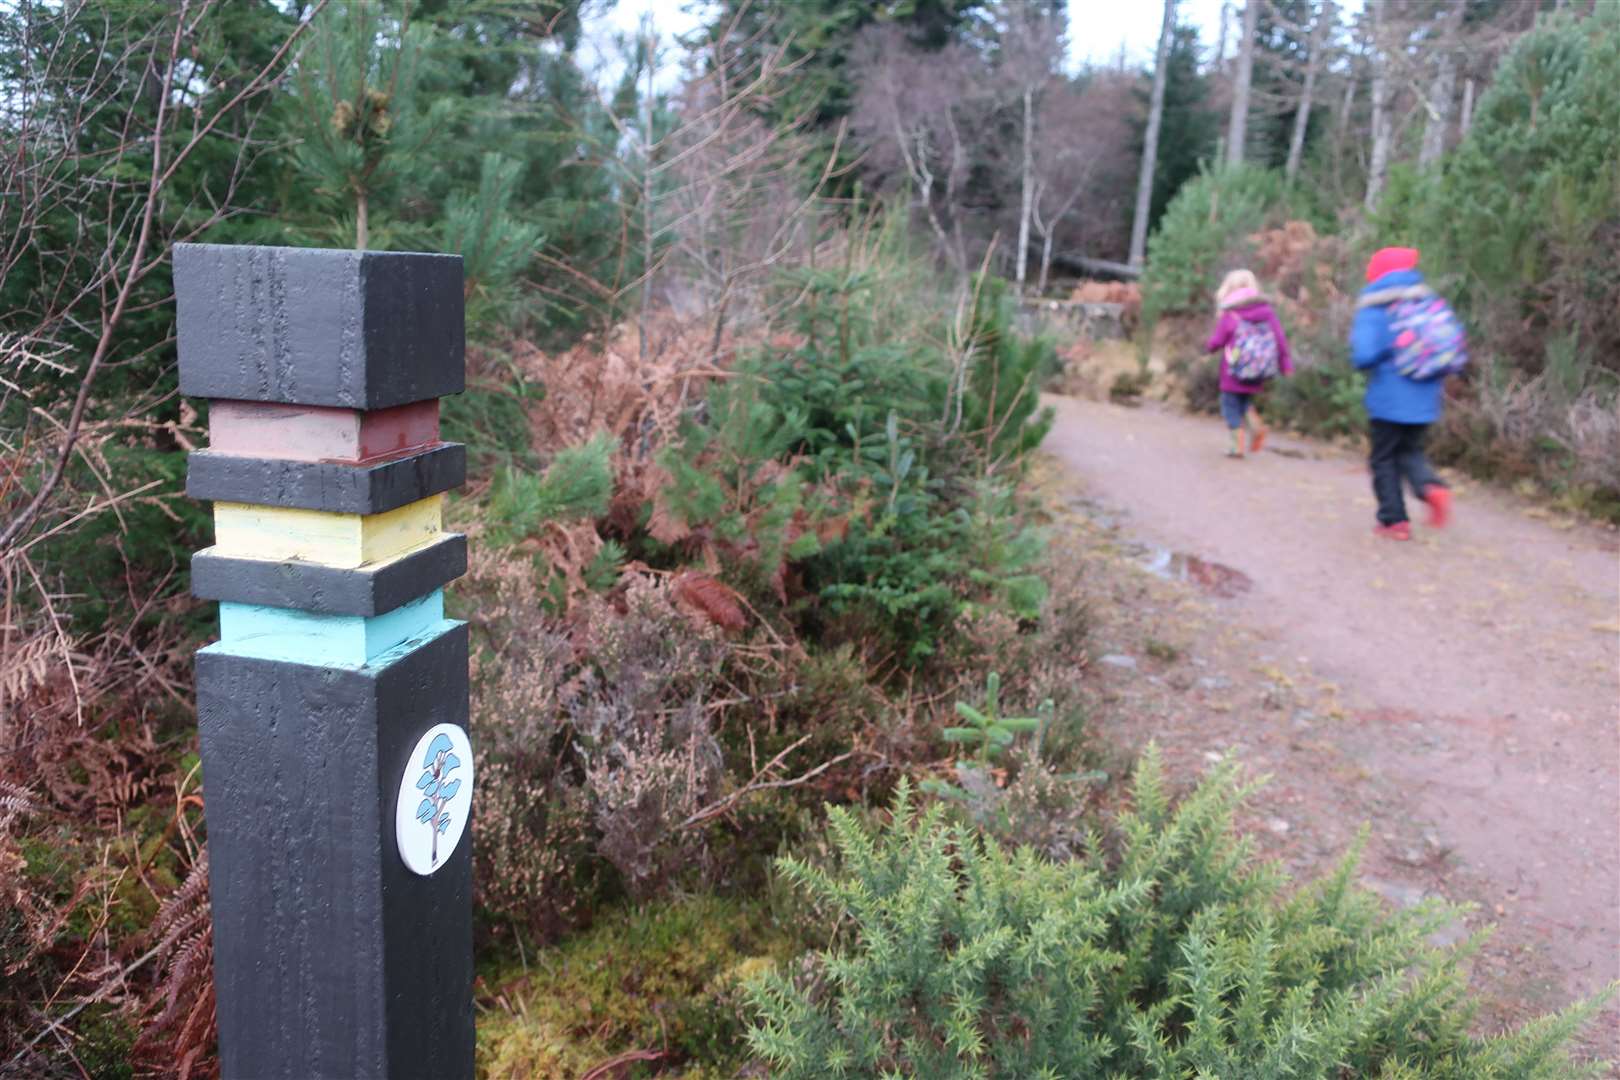 The walks are well marked with colour-coded posts.